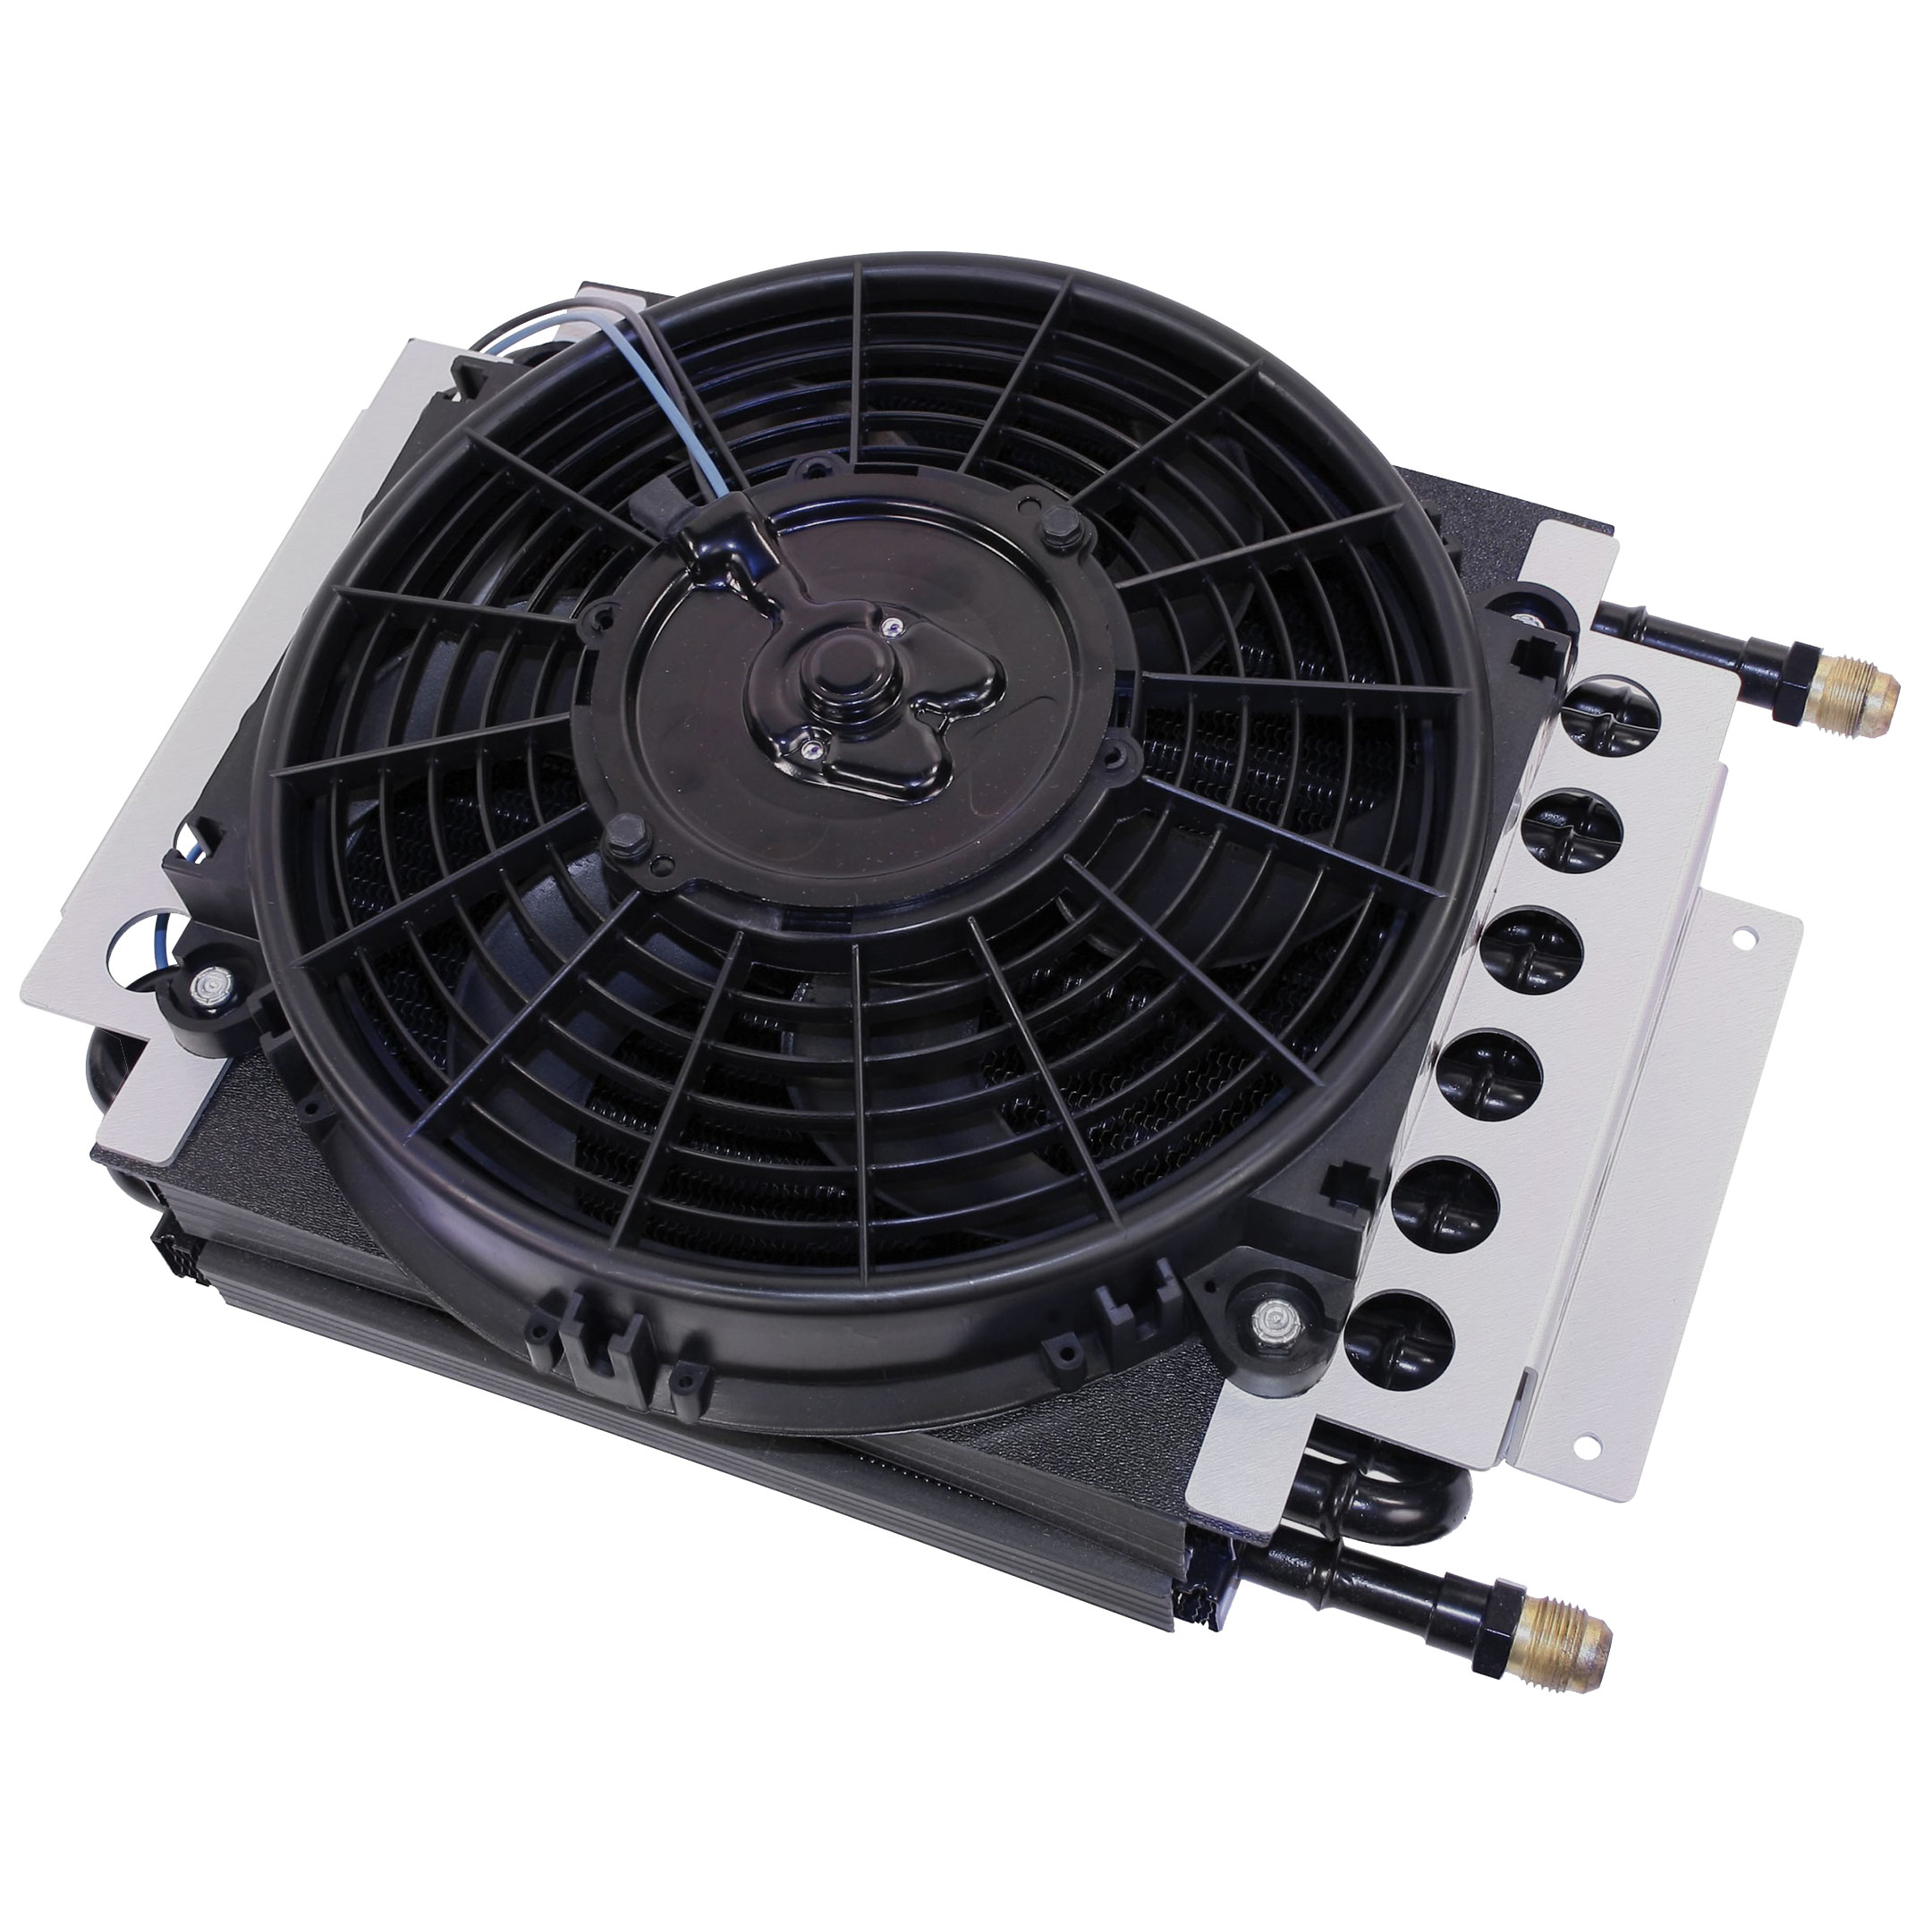 EMPI VW Fan and Cooler Kit - High Performance